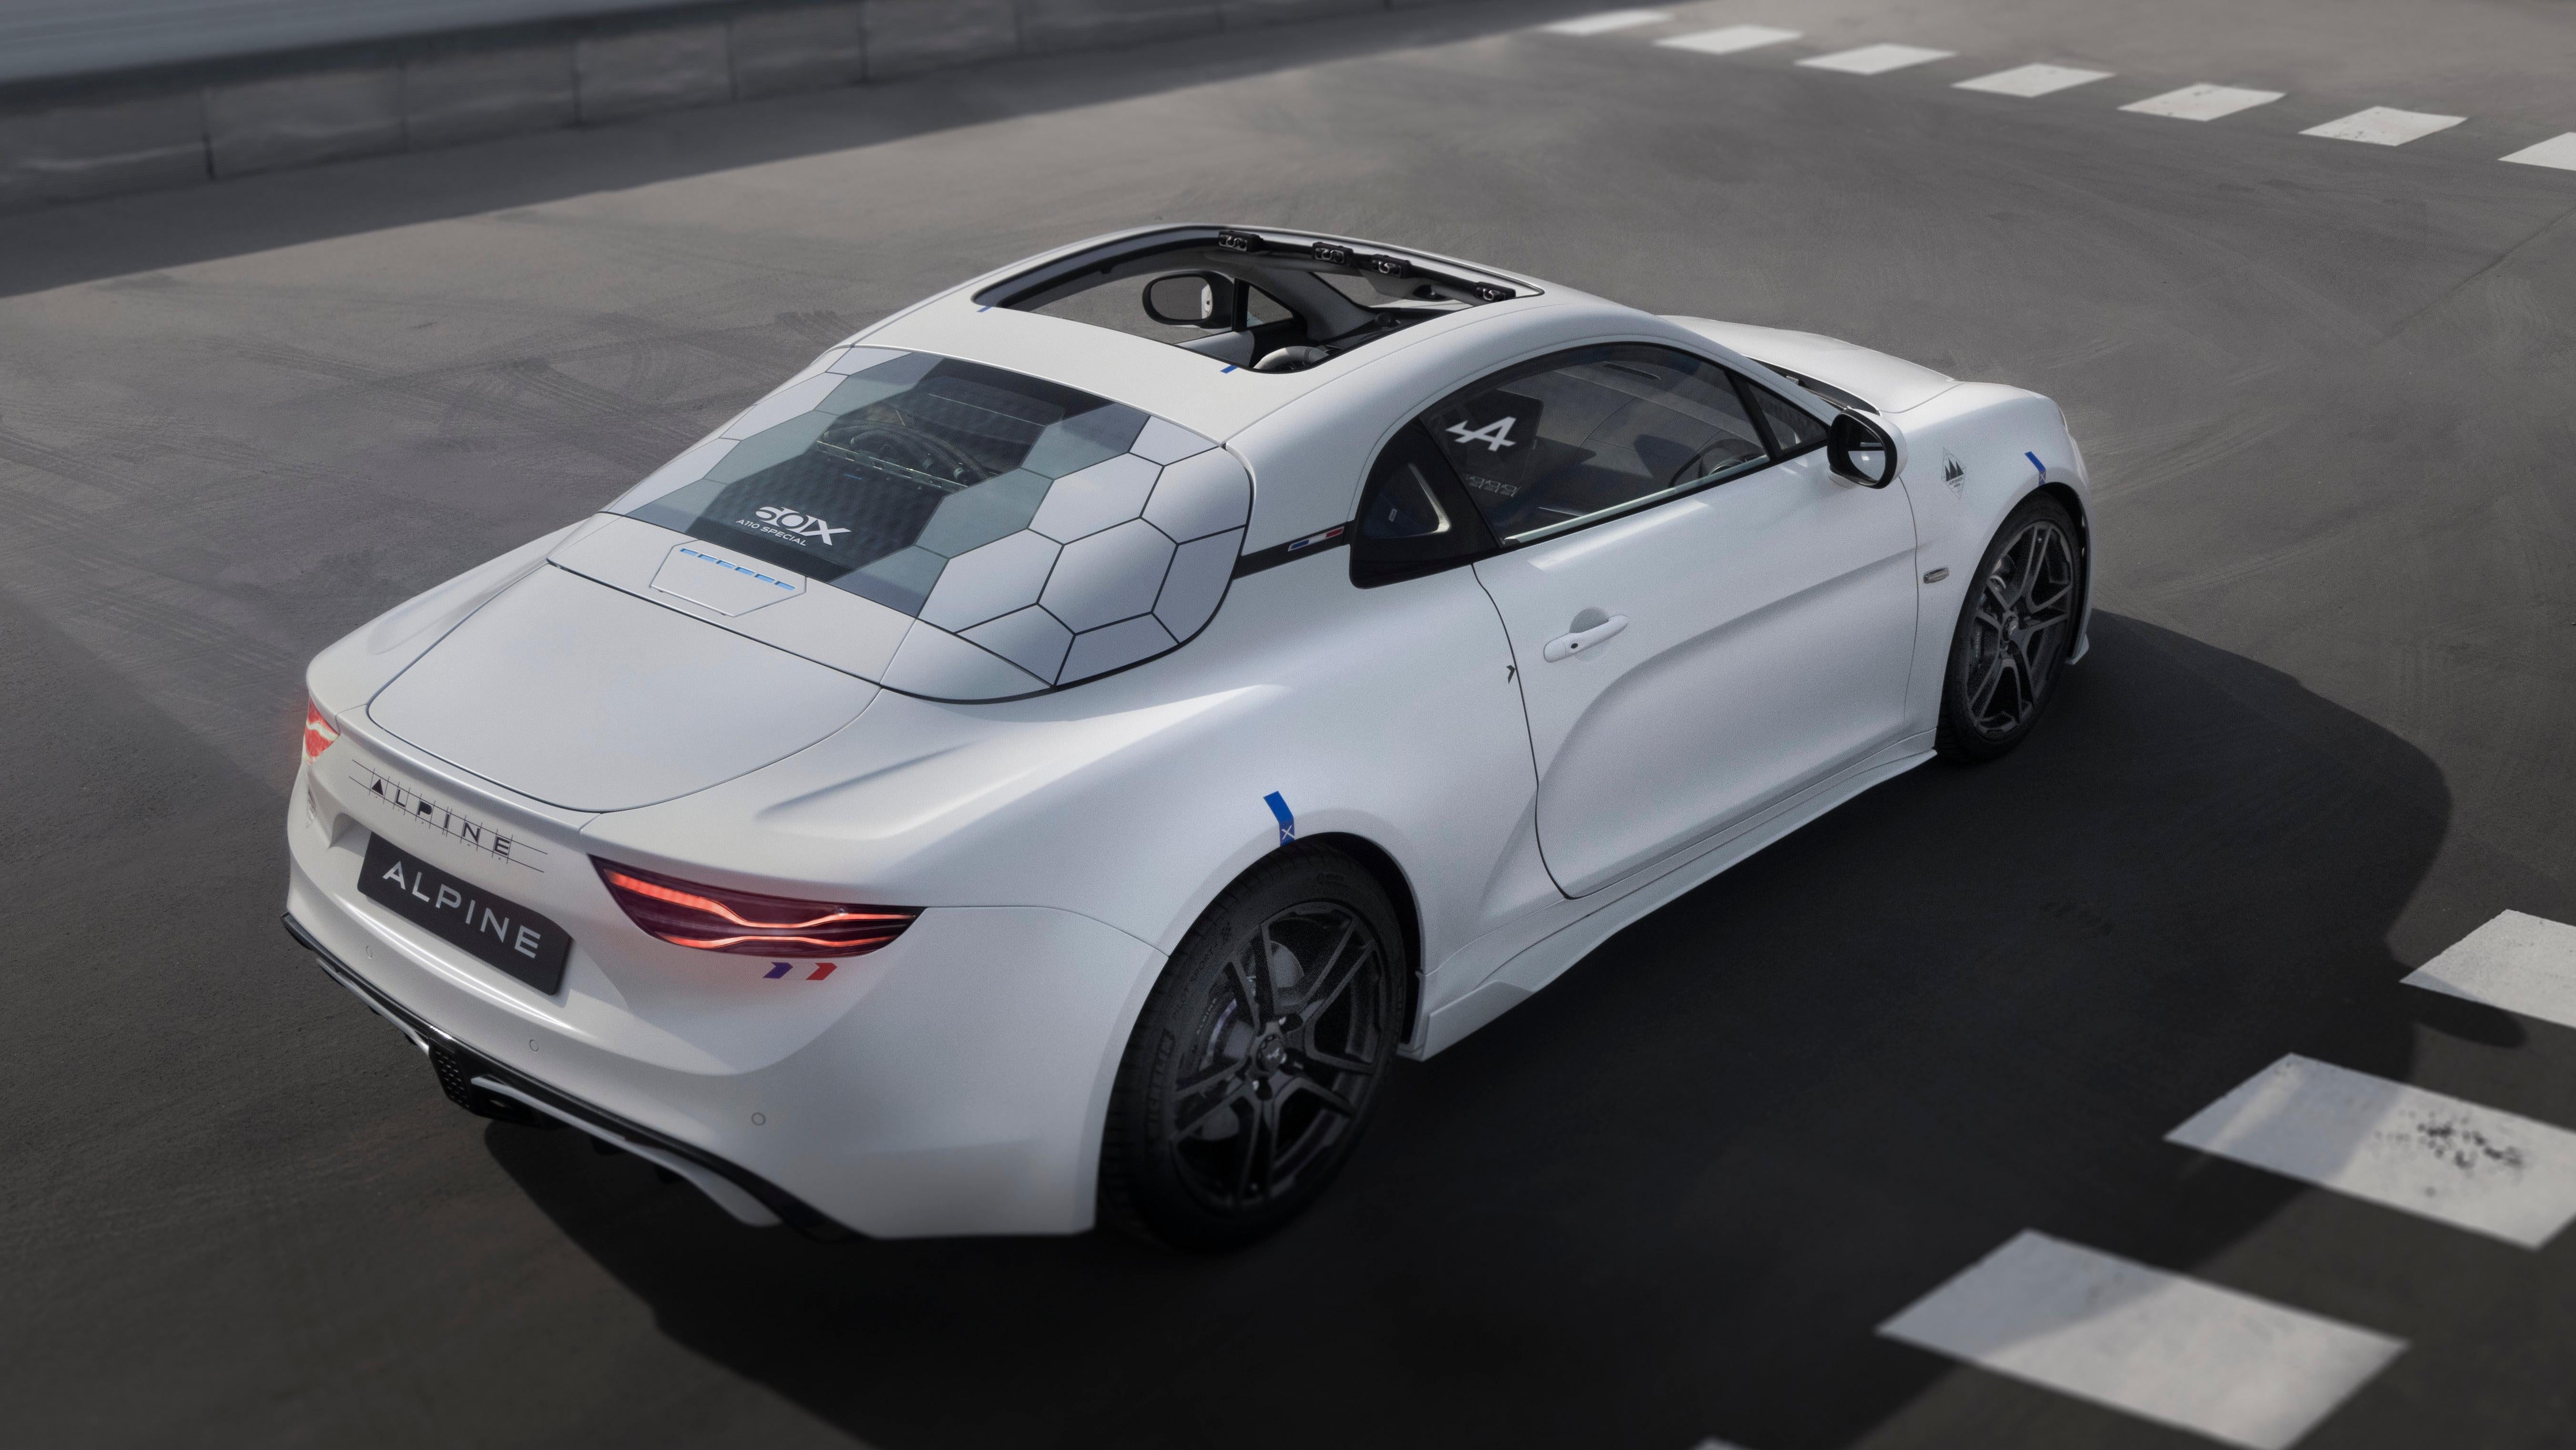 The Alpine A110 E-Ternité Teases the Possibility of an EV From Alpine